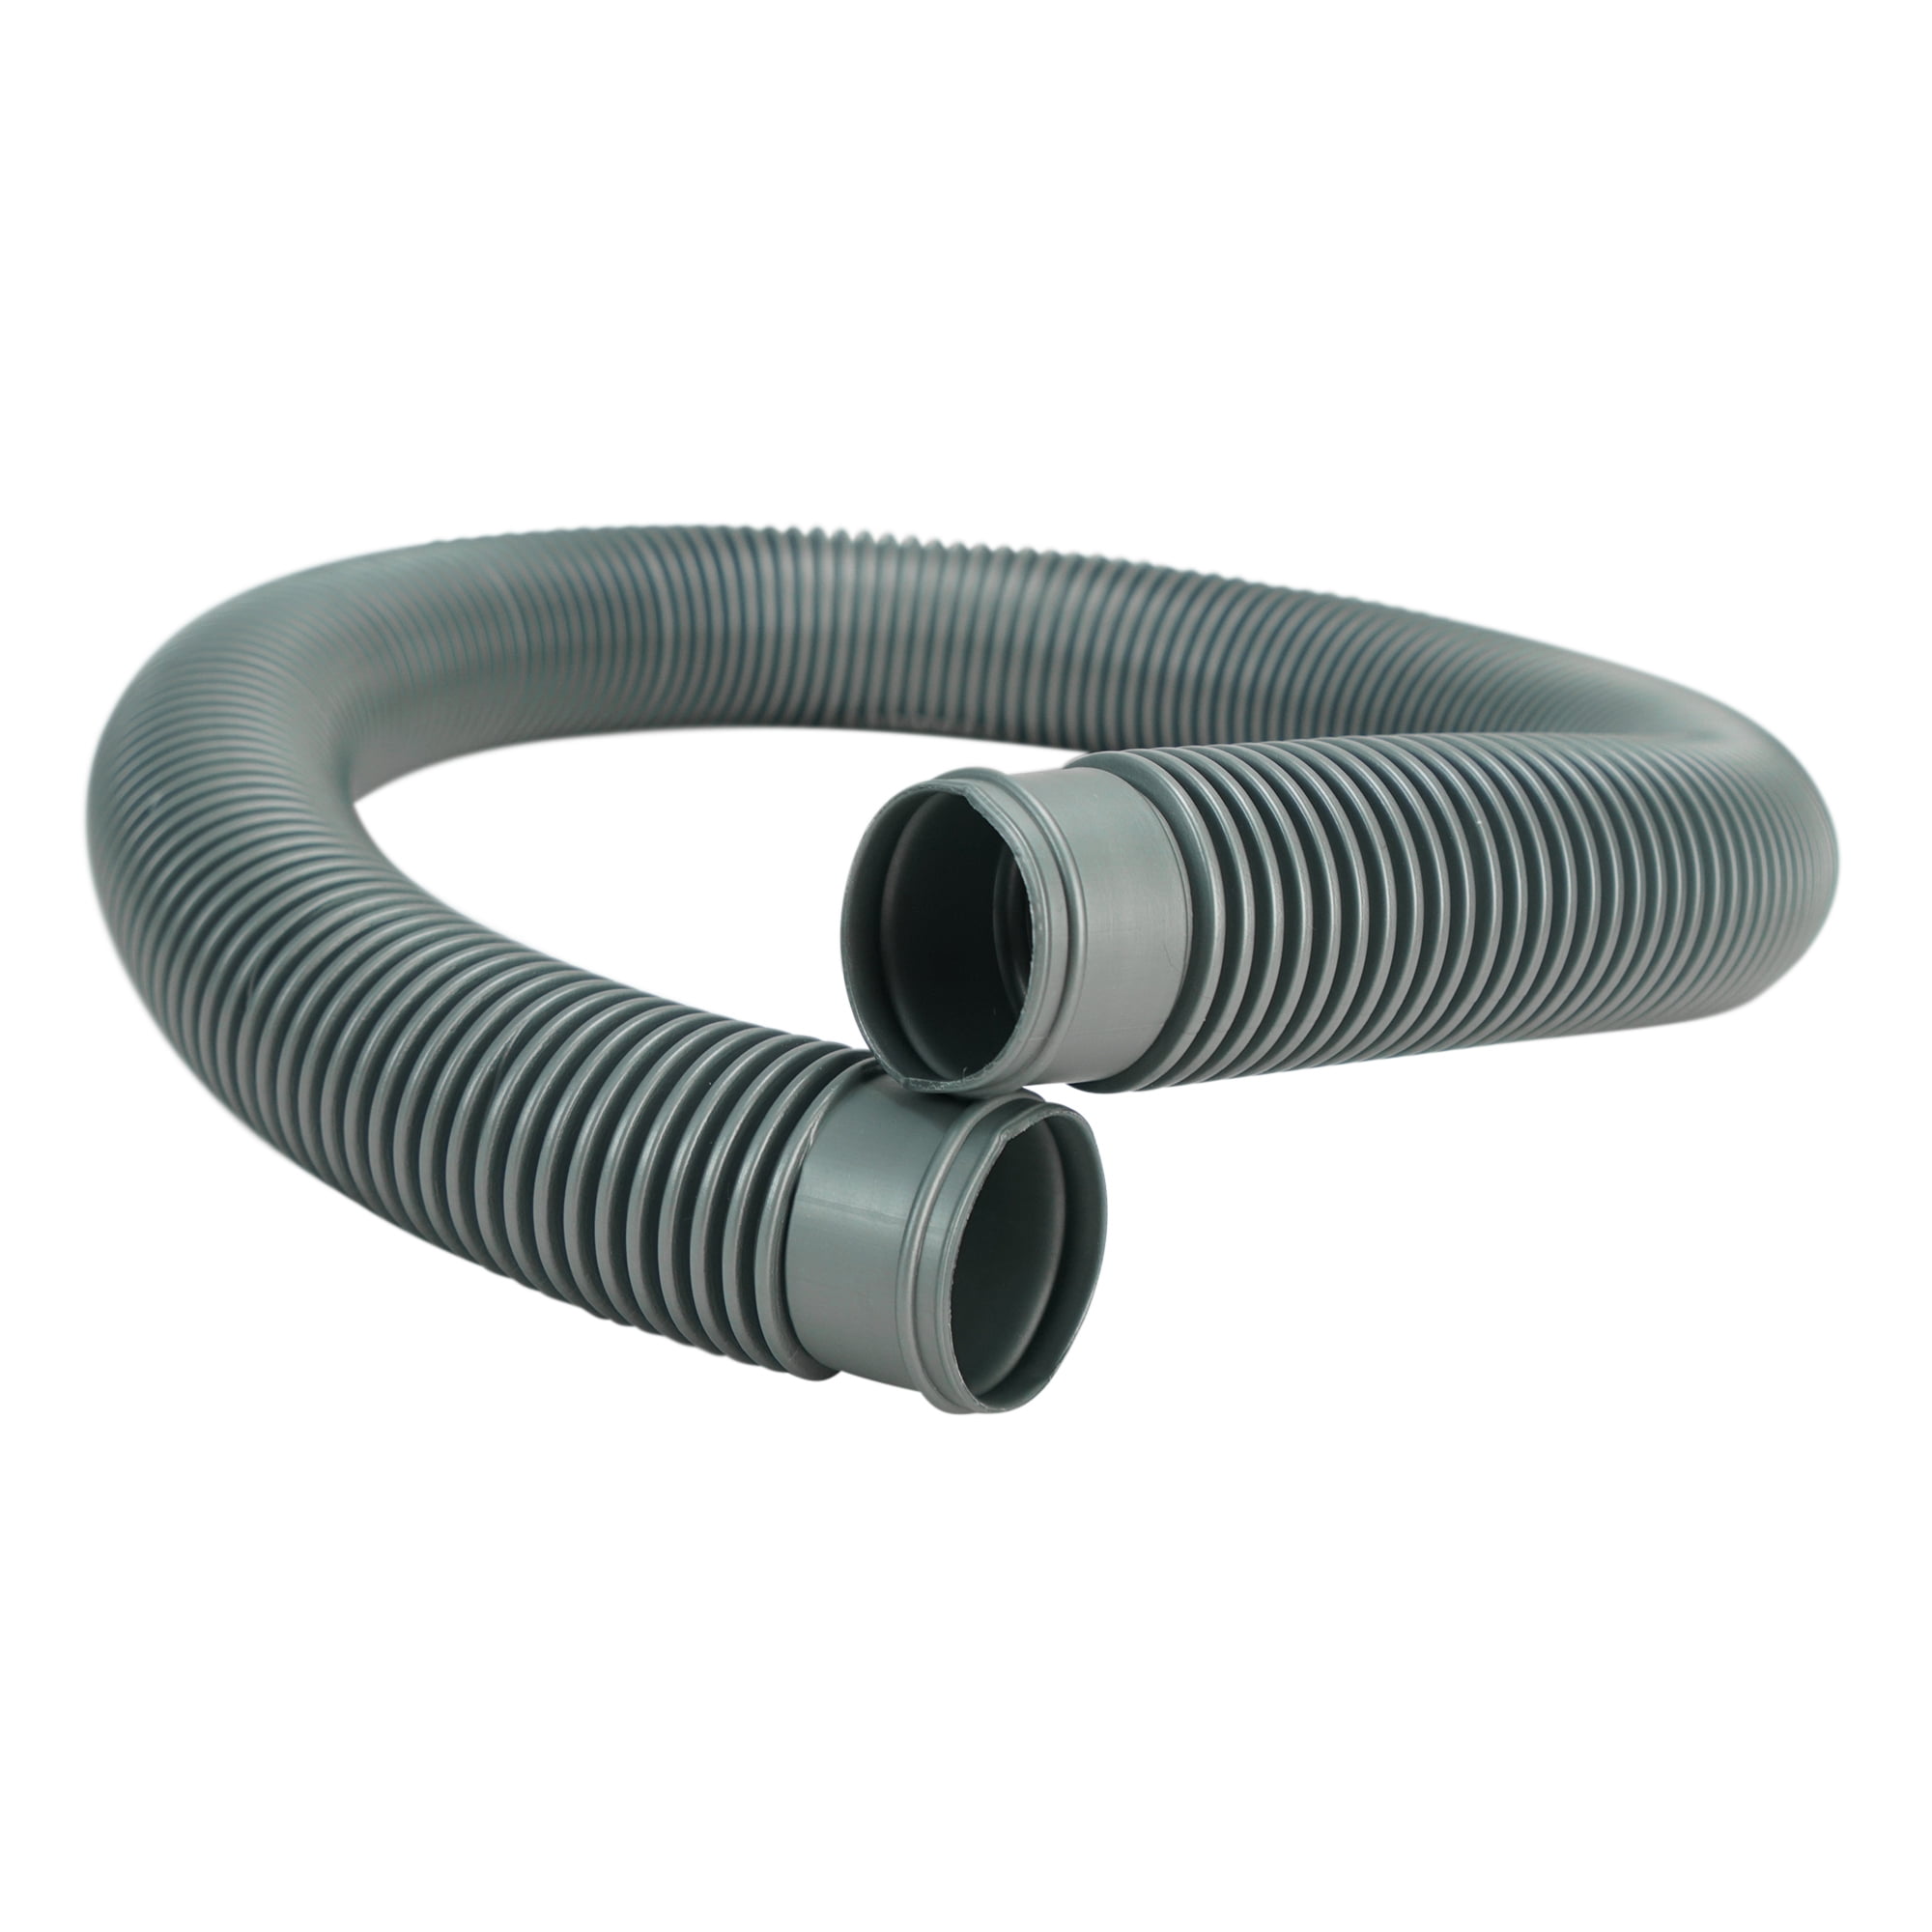 Swimming Pool FILTER CONNECTION 1.5 x 15 FT Premium Heavy Filter Hose 